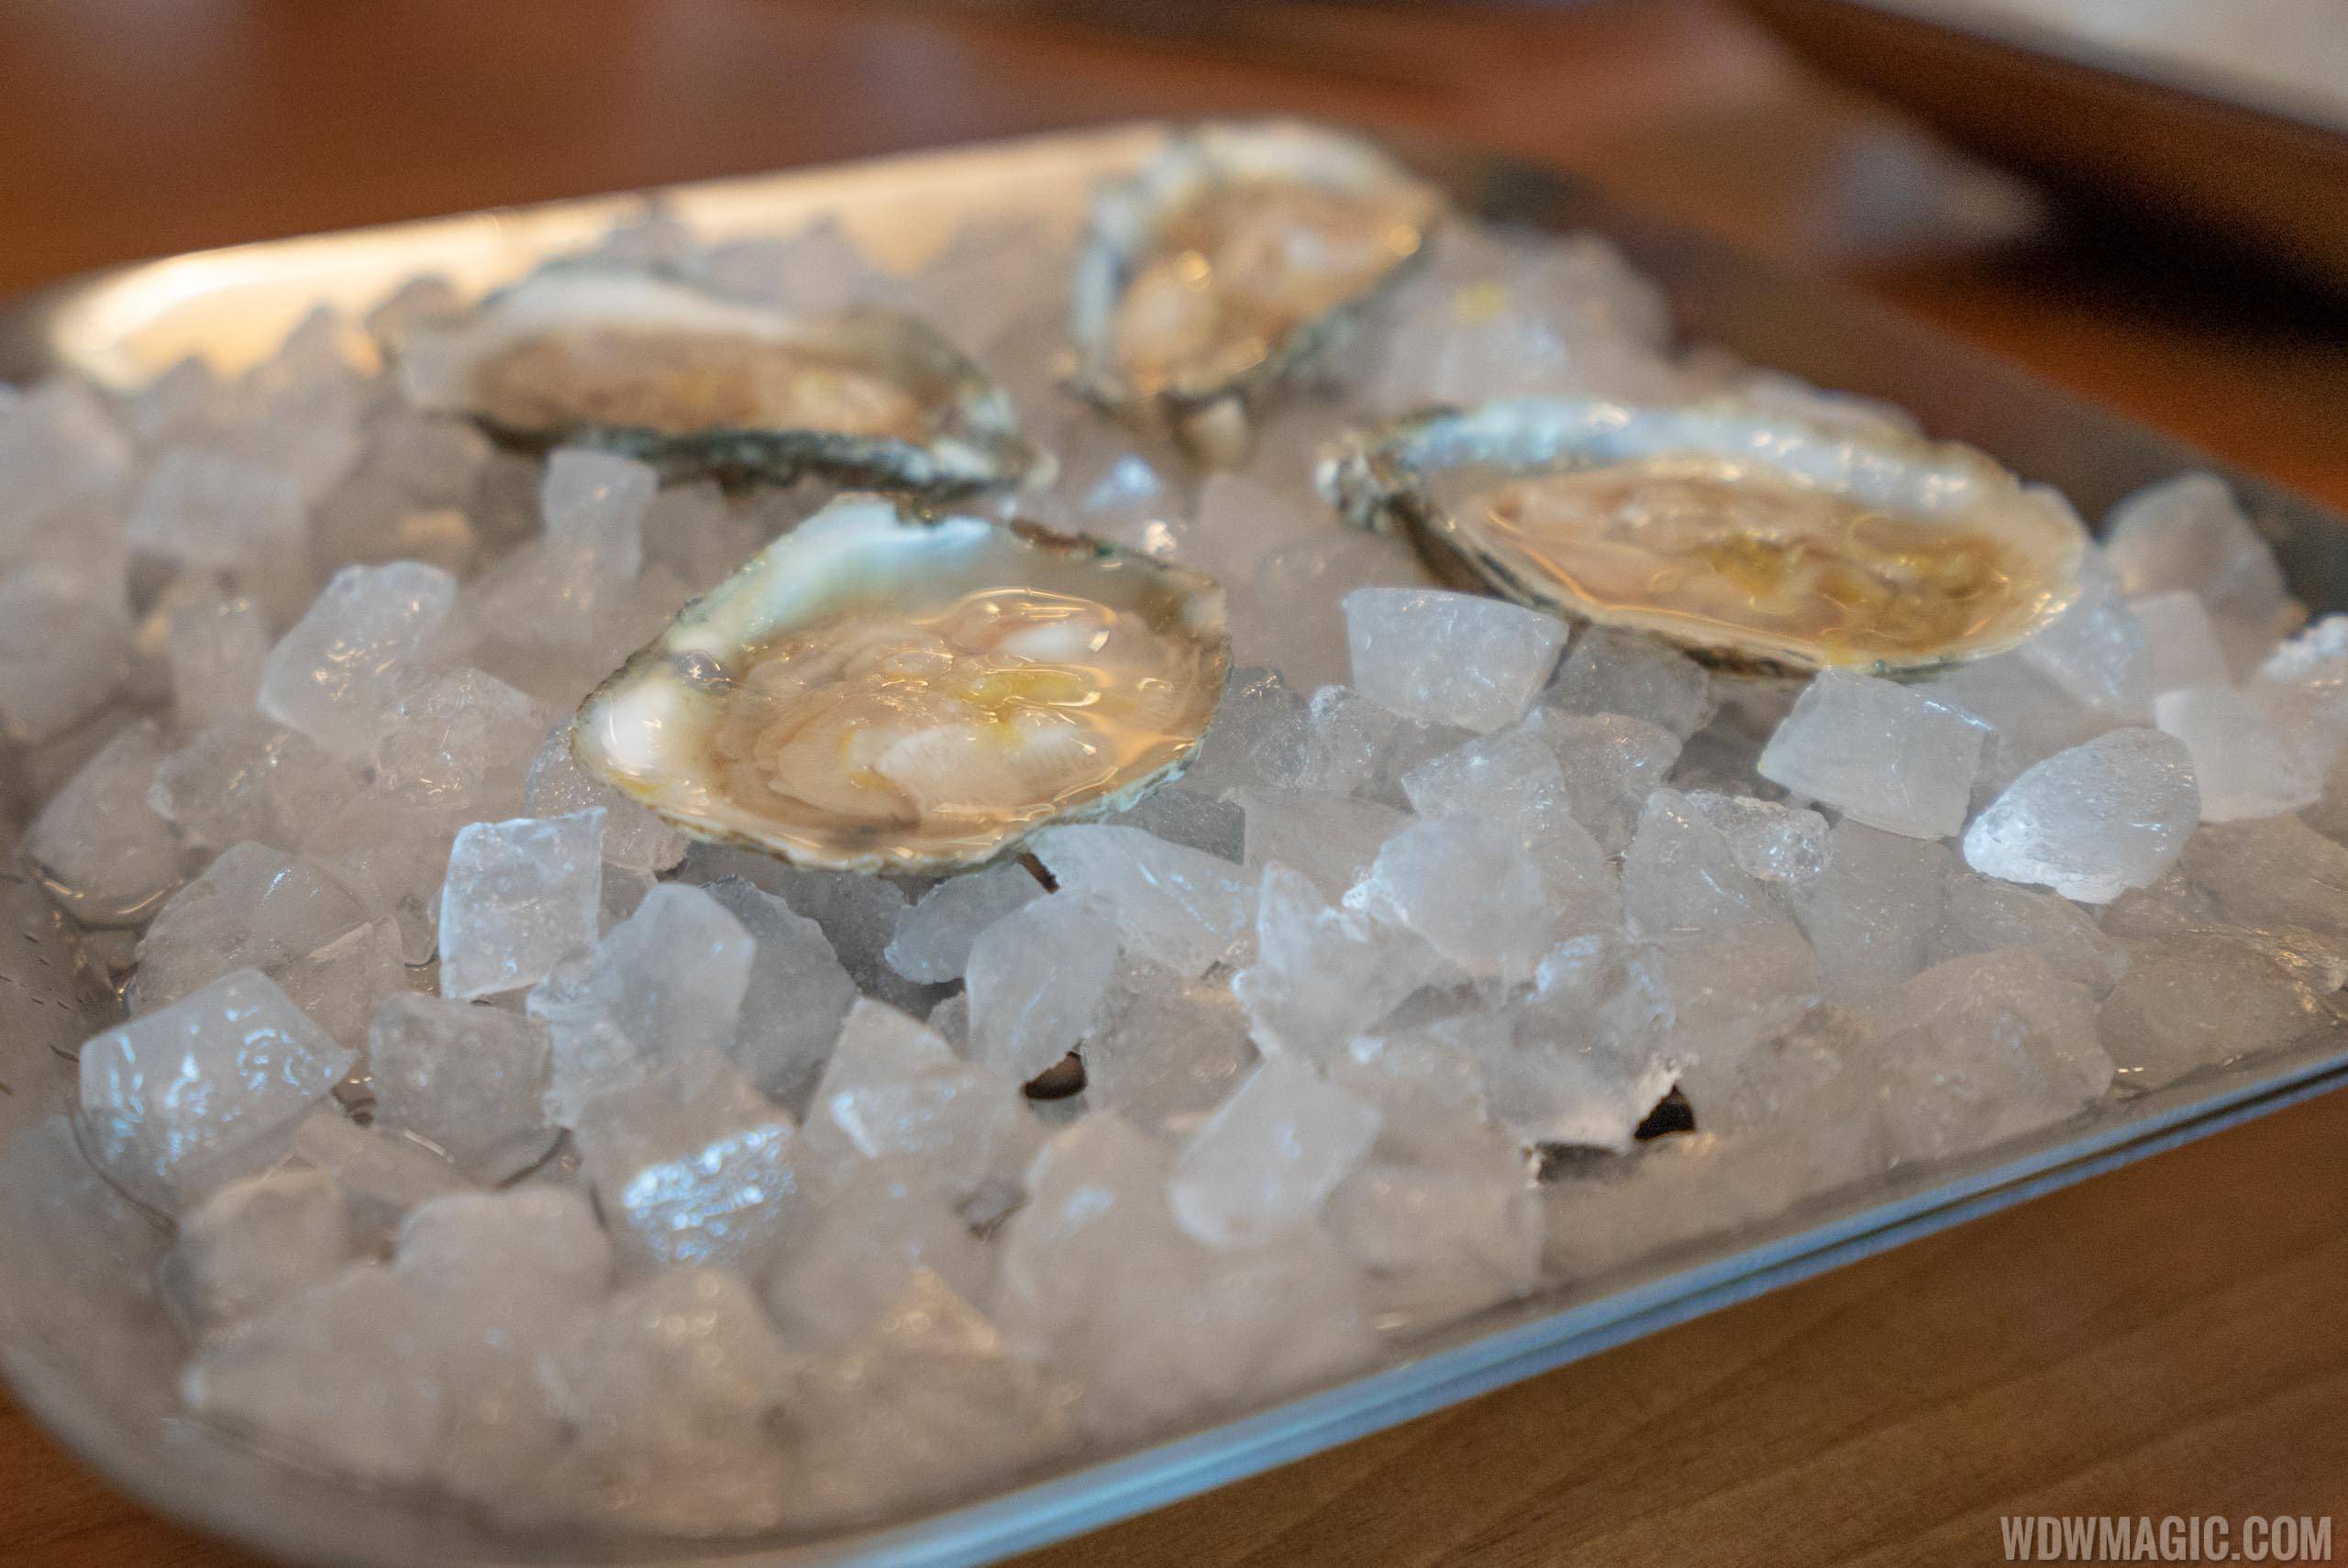 Chef's tasting menu: José's Way - Oysters with lemon, gin and tonic